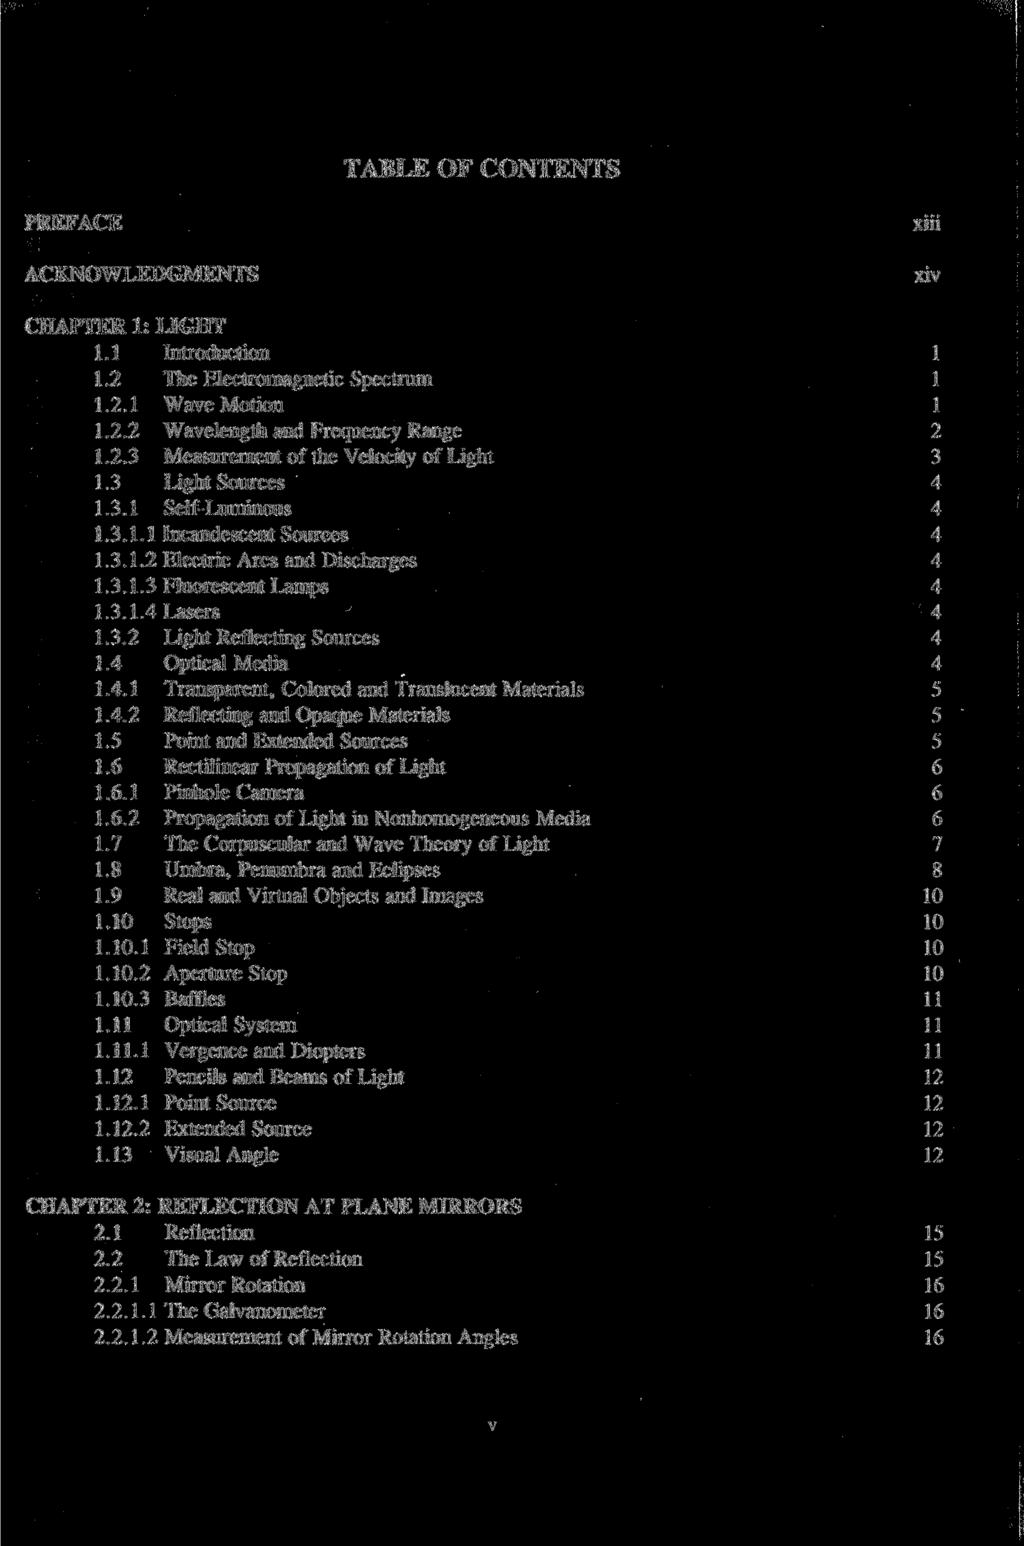 TABLE OF CONTENTS PREFACE ACKNOWLEDGMENTS xiii xiv CHAPTER 1: LIGHT 1.1 Introduction 1 1.2 The Electromagnetic Spectrum 1 1.2.1 Wave Motion 1 1.2.2 Wavelength and Frequency Range 2 1.2.3 Measurement of the Velocity of Light 3 1.